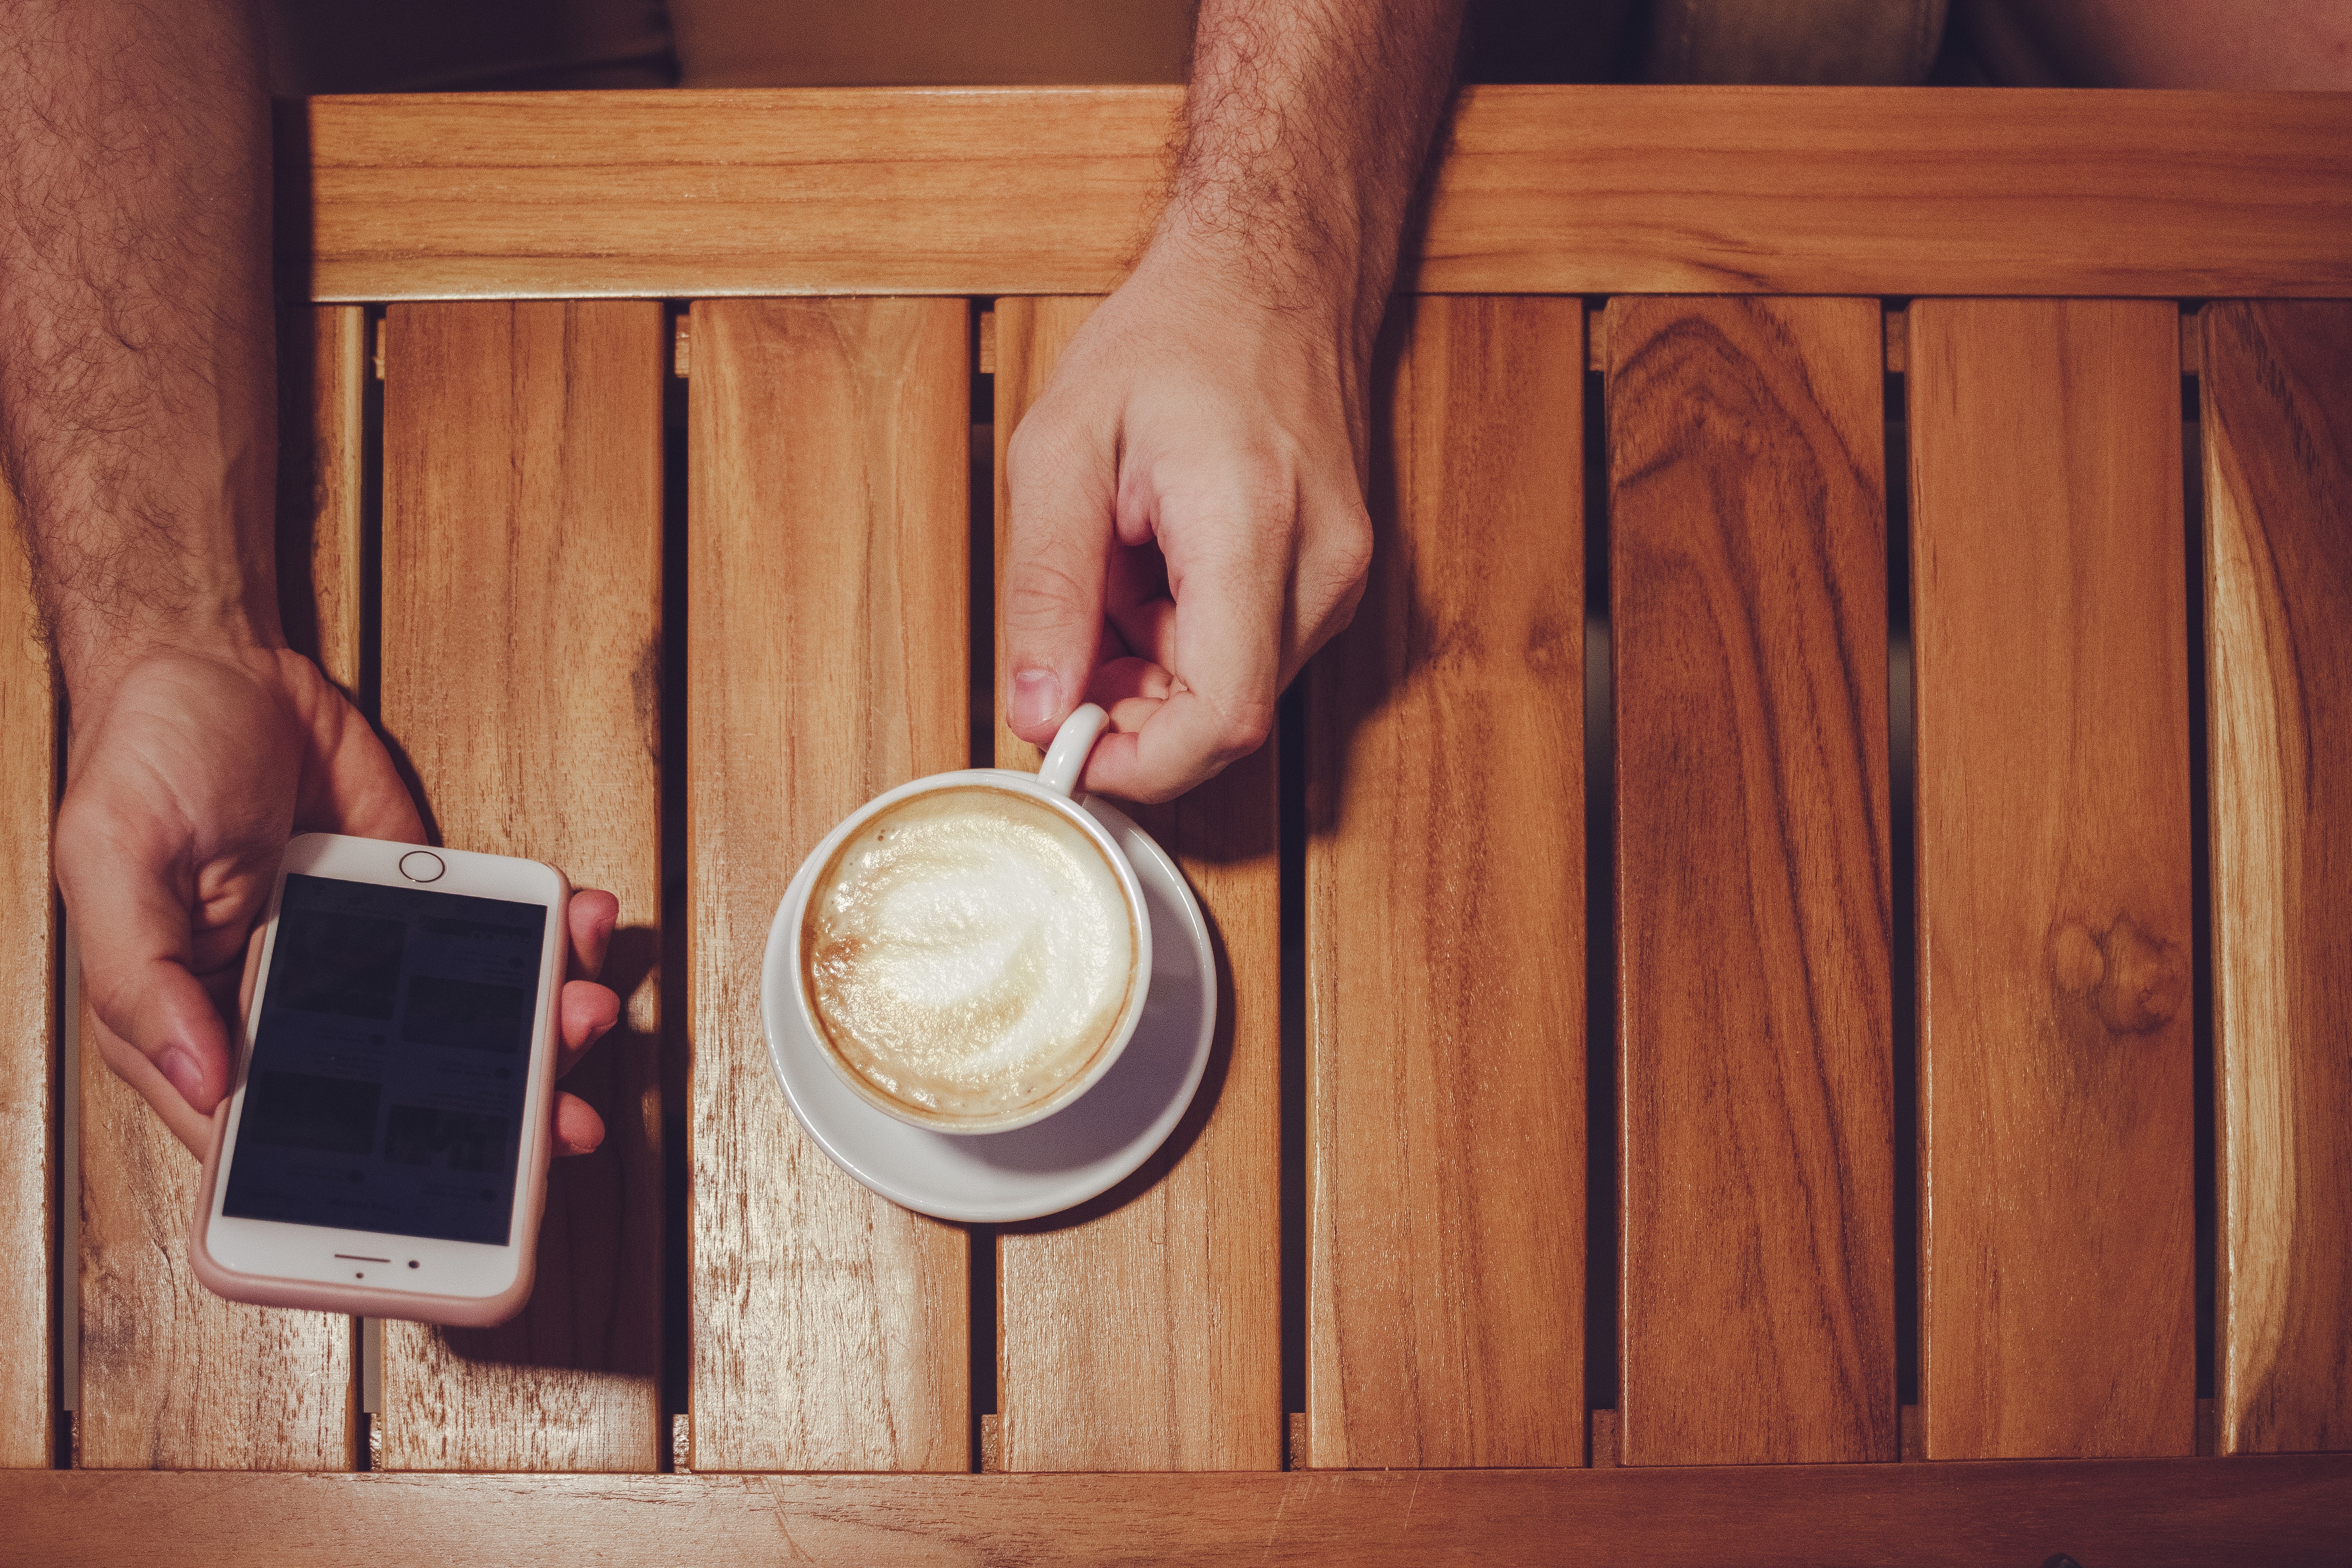 Person holding turned off gold iphone 6 with case and white ceramic cup filled with latte photo